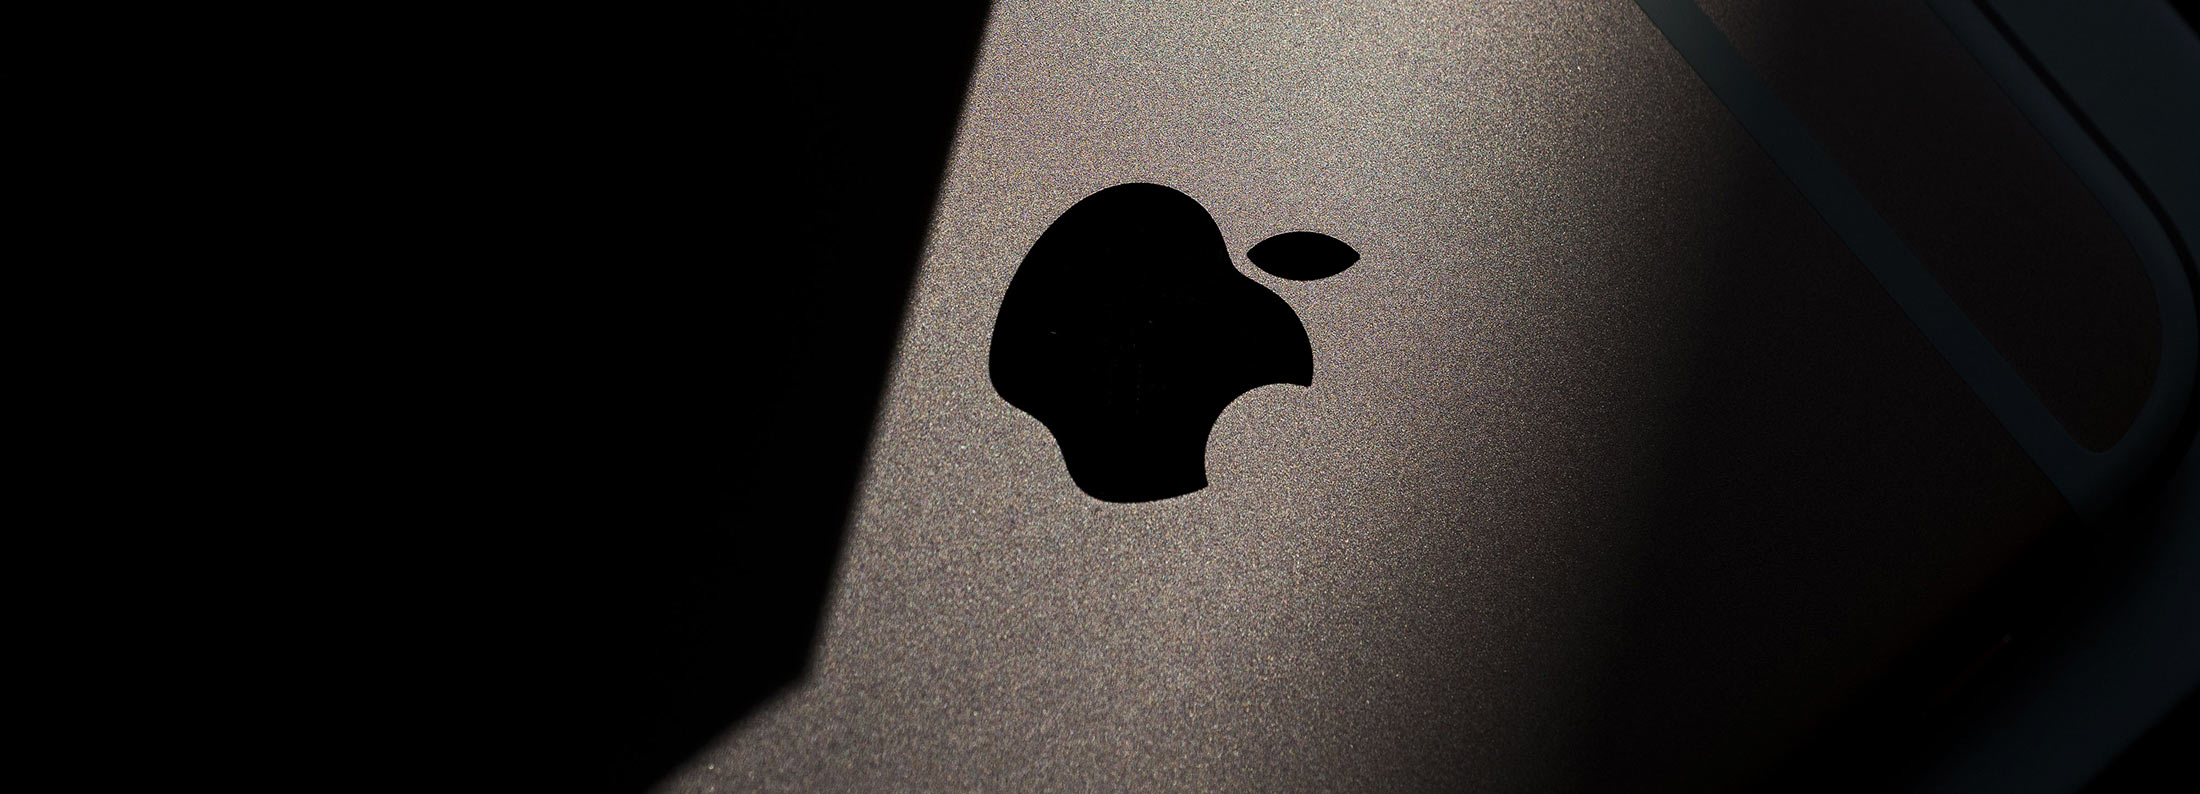 An Apple Inc. logo is seen on an iPhone 6s smartphone in an arranged photograph in Hong Kong, China, on Friday, Sept. 25, 2015. The latest models, following last year\'s hugely popular design overhaul that added bigger screens, may not match the success of previous releases, according to analysts.